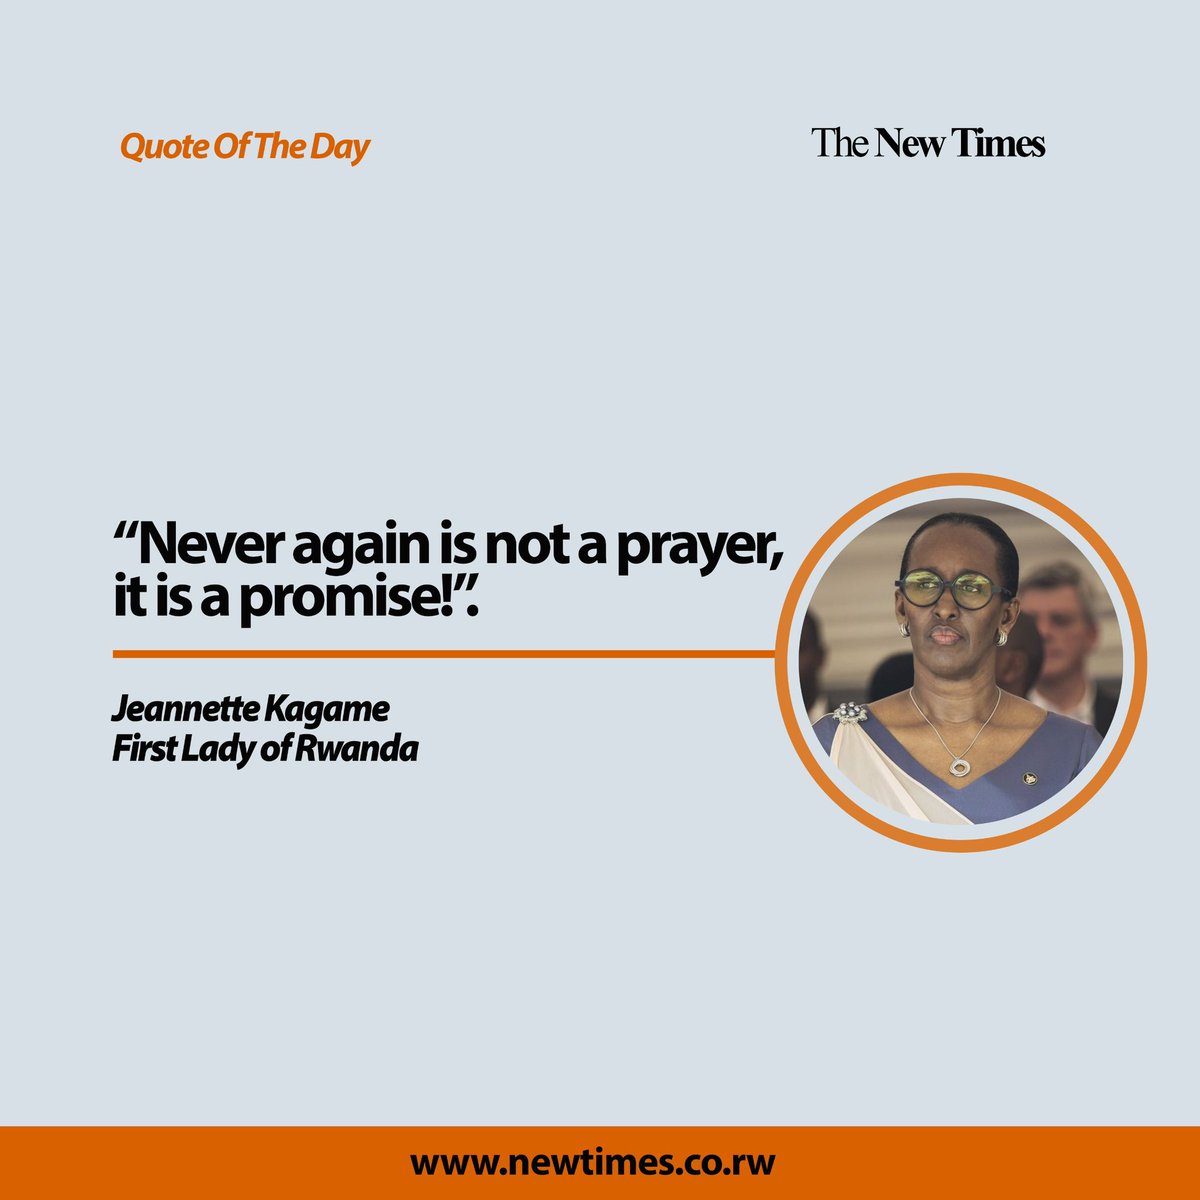 #TNTQuote OF THE DAY: “Never again is not a prayer, it is a promise” NEWTIMES.CO.RW